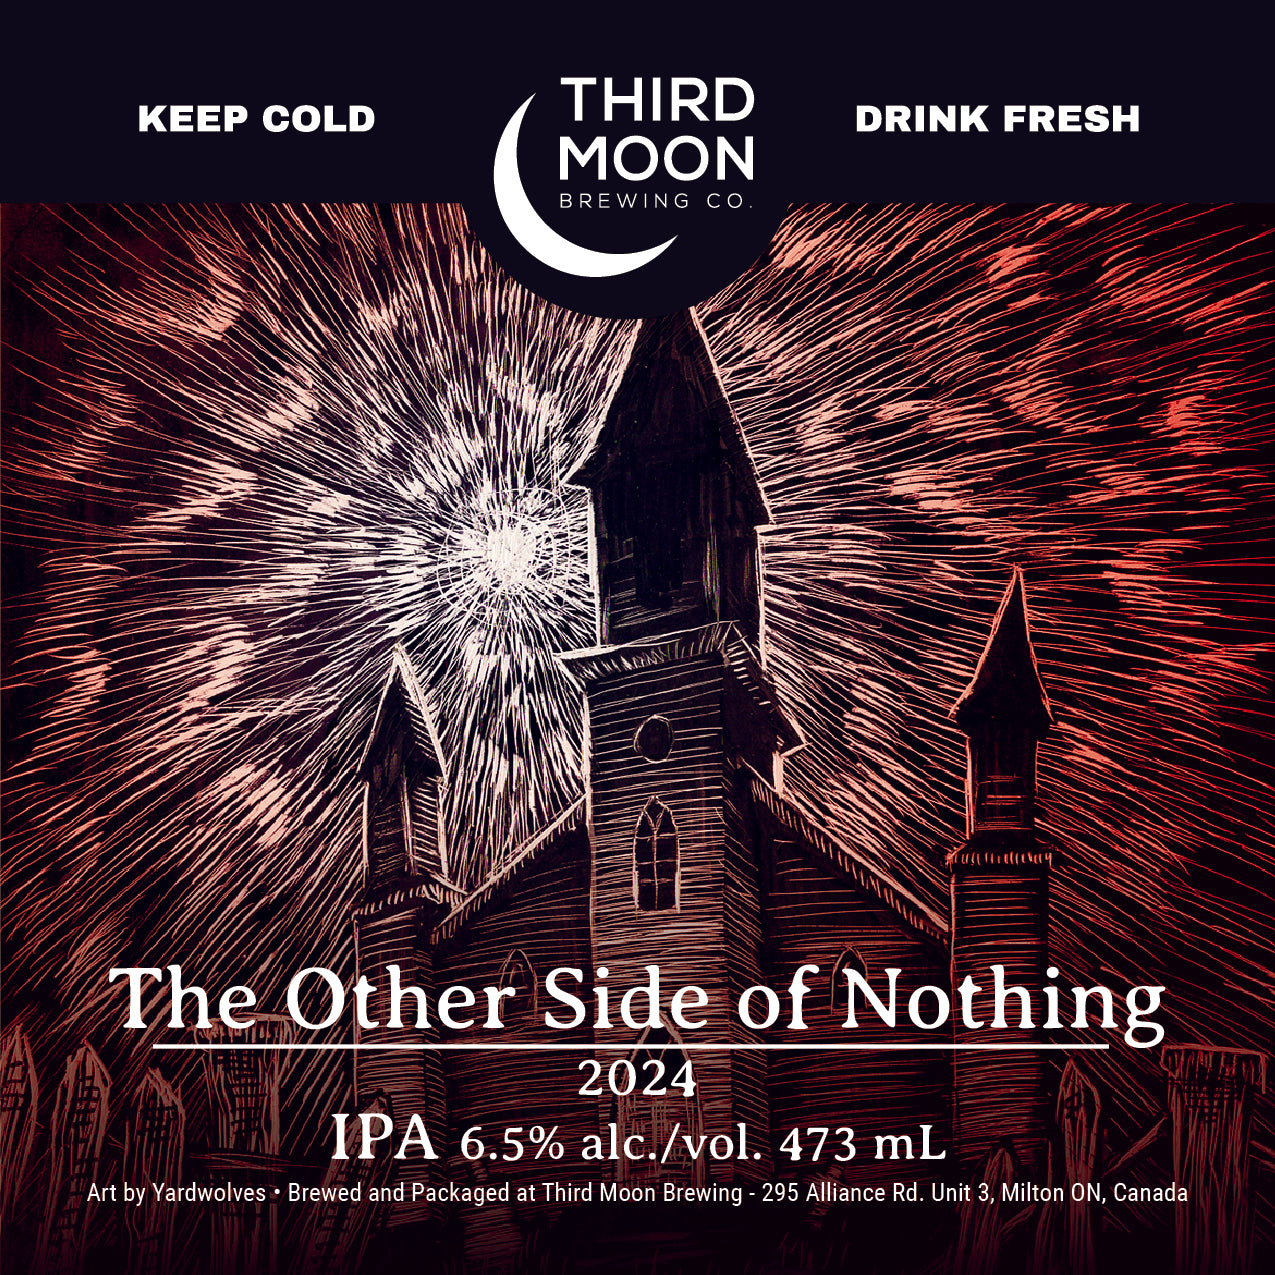 Hazy IPA - 4-pk of "The Other Side Of Nothing" tall cans